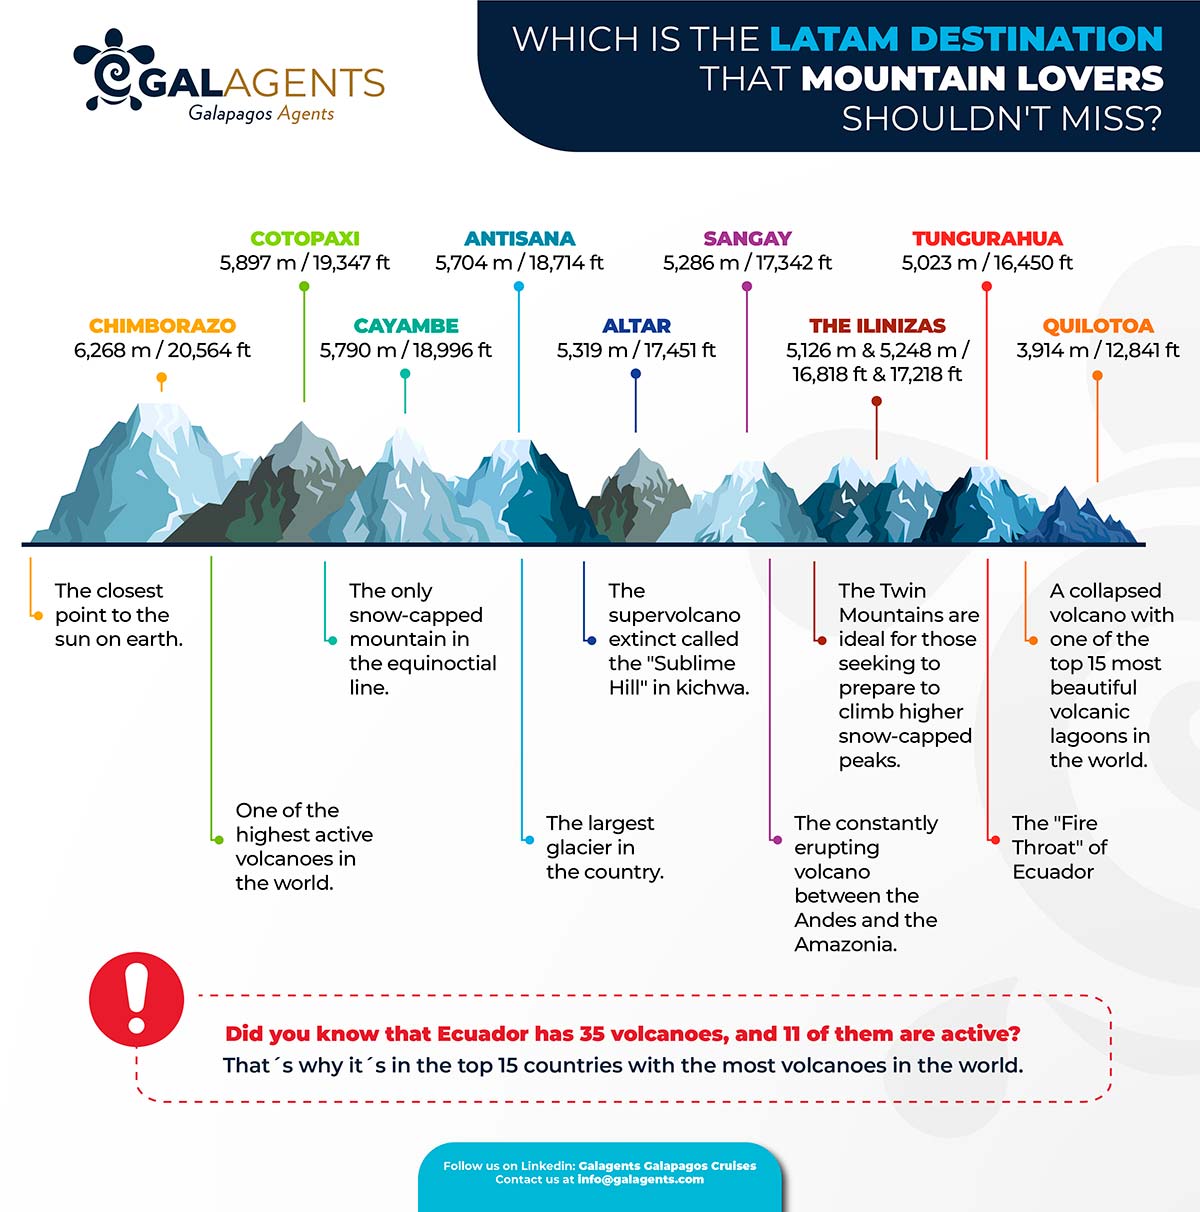 Which is the latam destination that mountain lovers shouldnt miss by Galagents